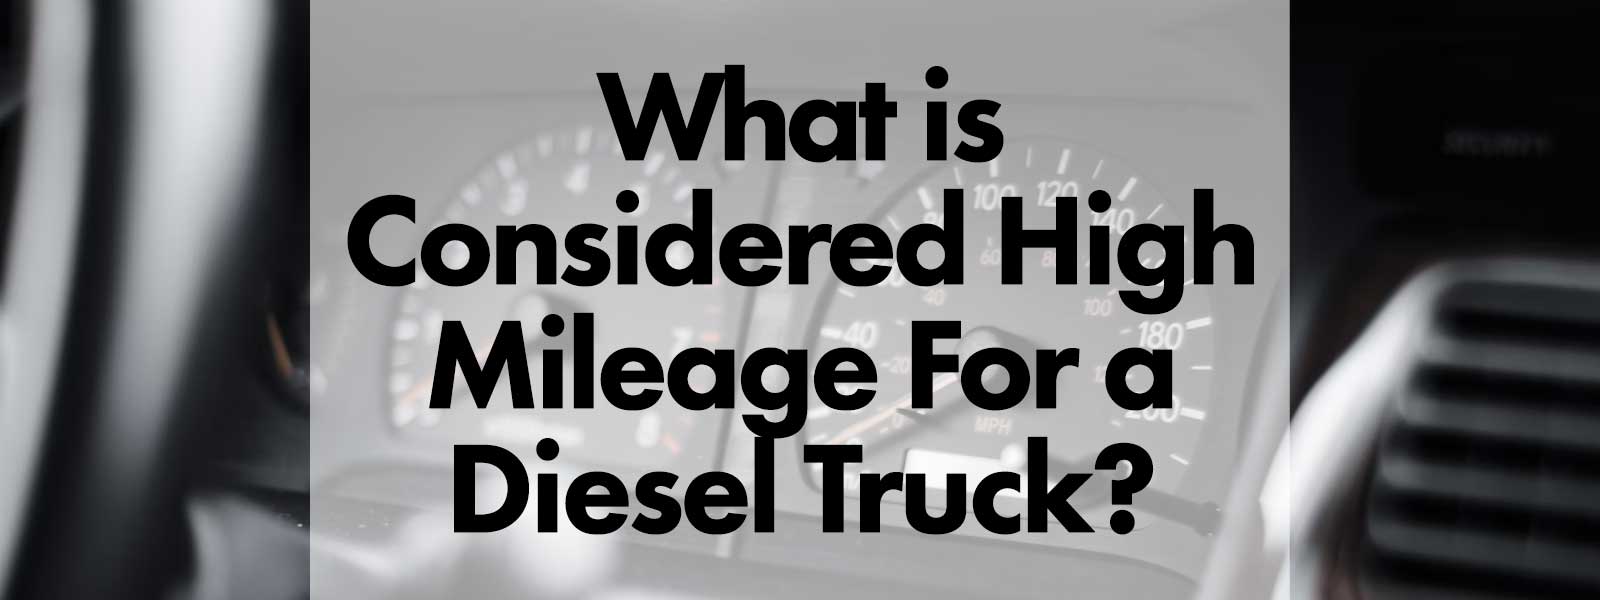 What Is Considered High Mileage For A Diesel Truck?